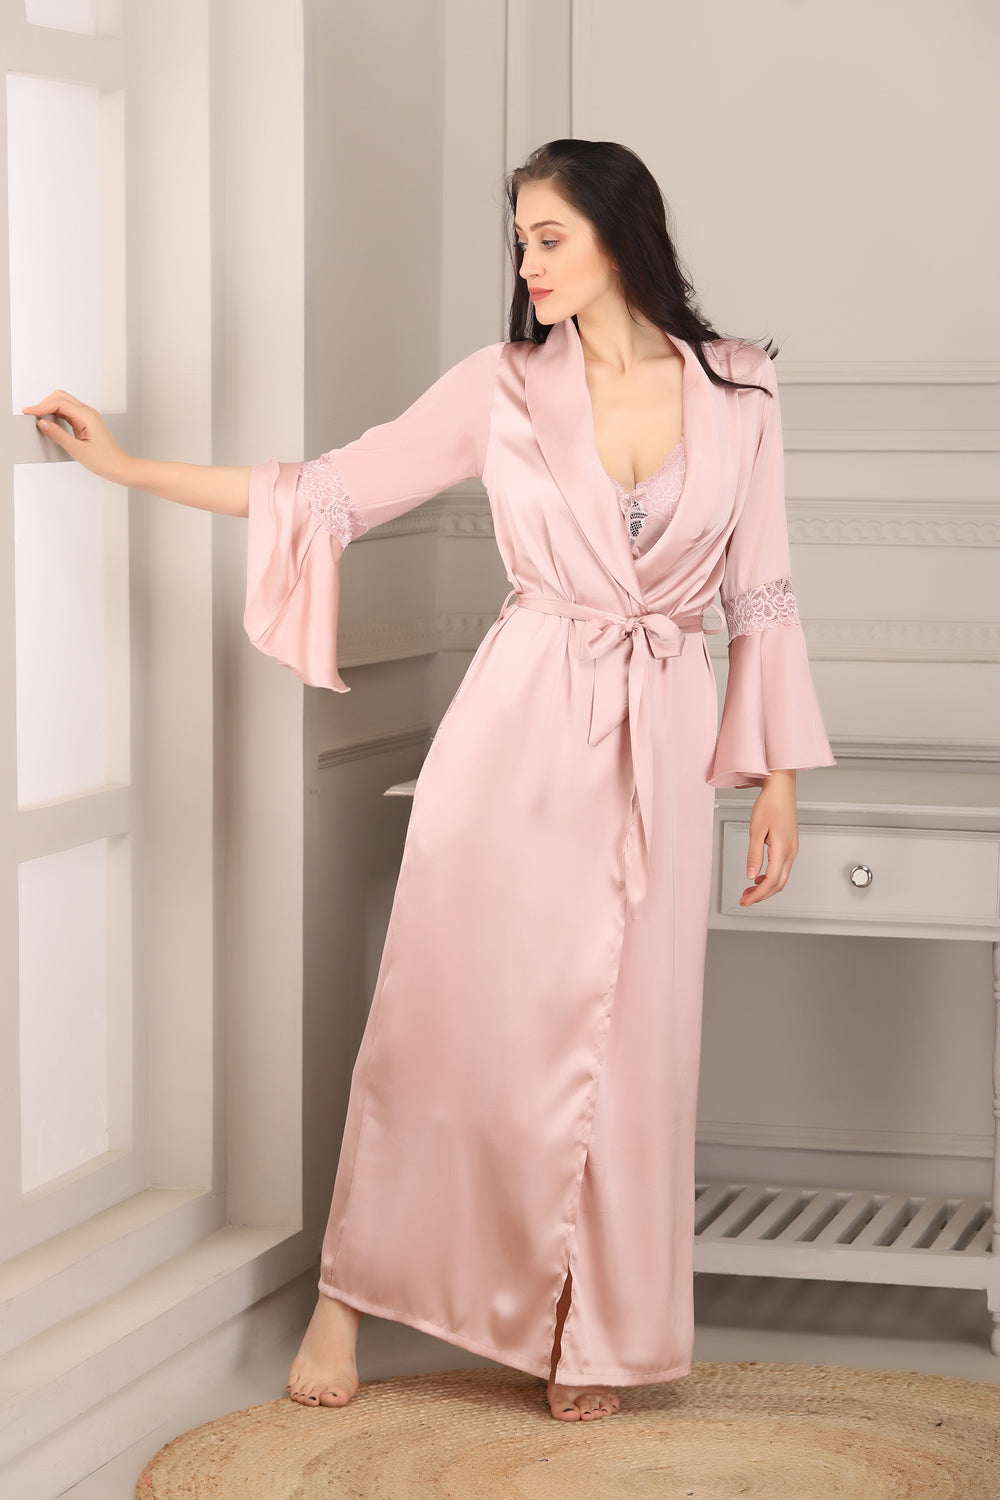 Floral satin Nightgown set - Private Lives